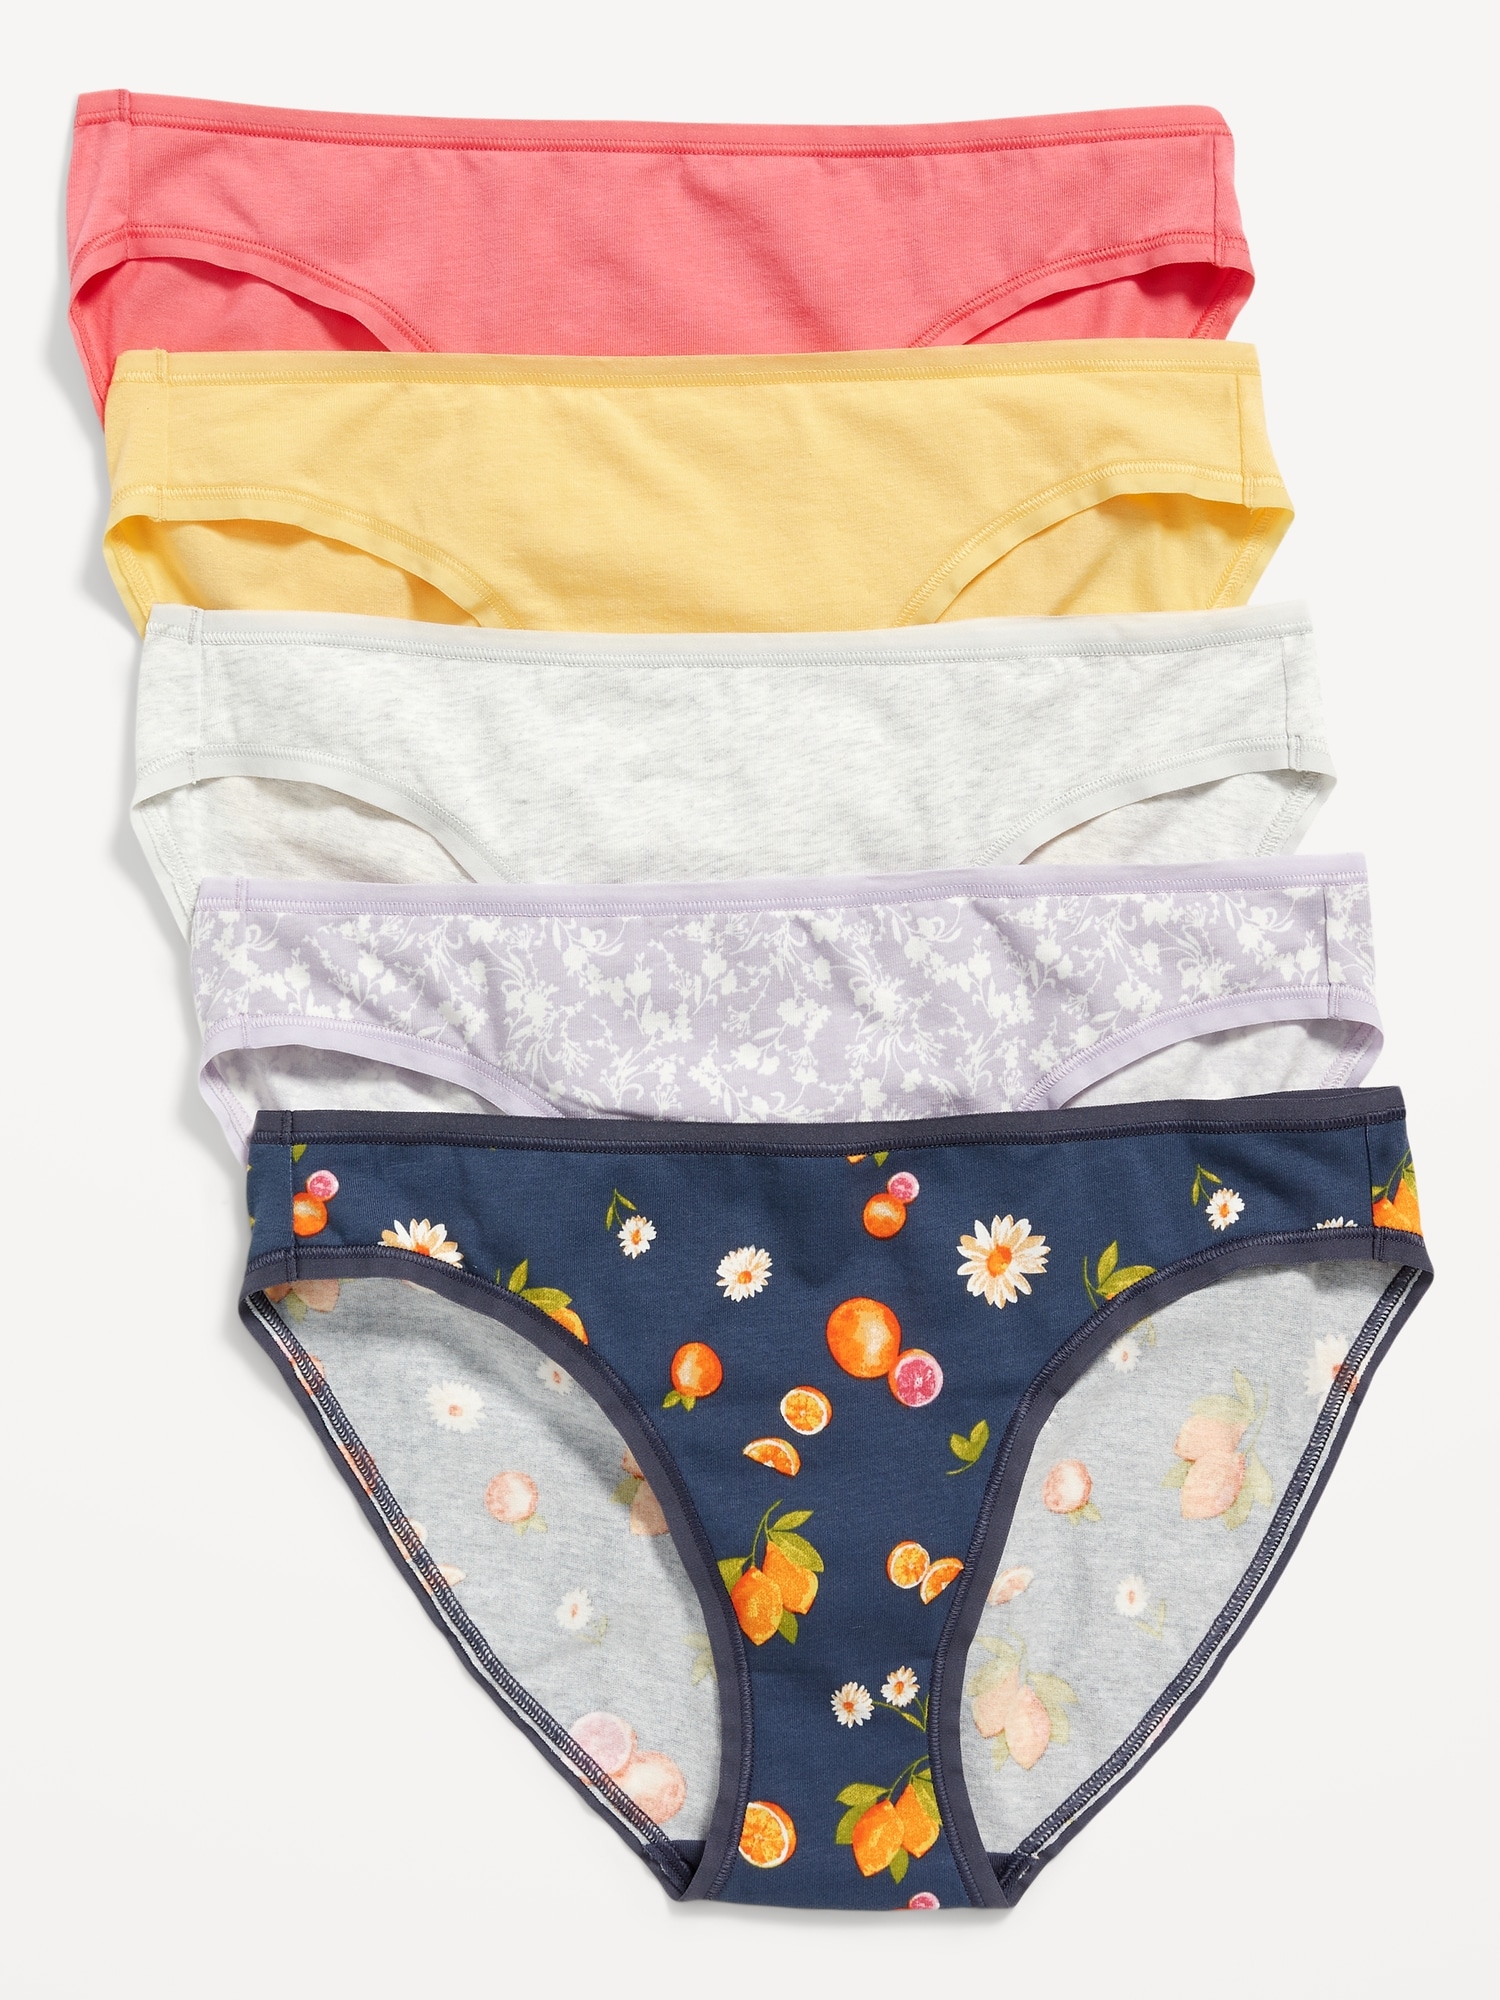 Old Navy Mid-Rise Cotton-Blend Bikini Underwear 5-Pack for Women yellow. 1